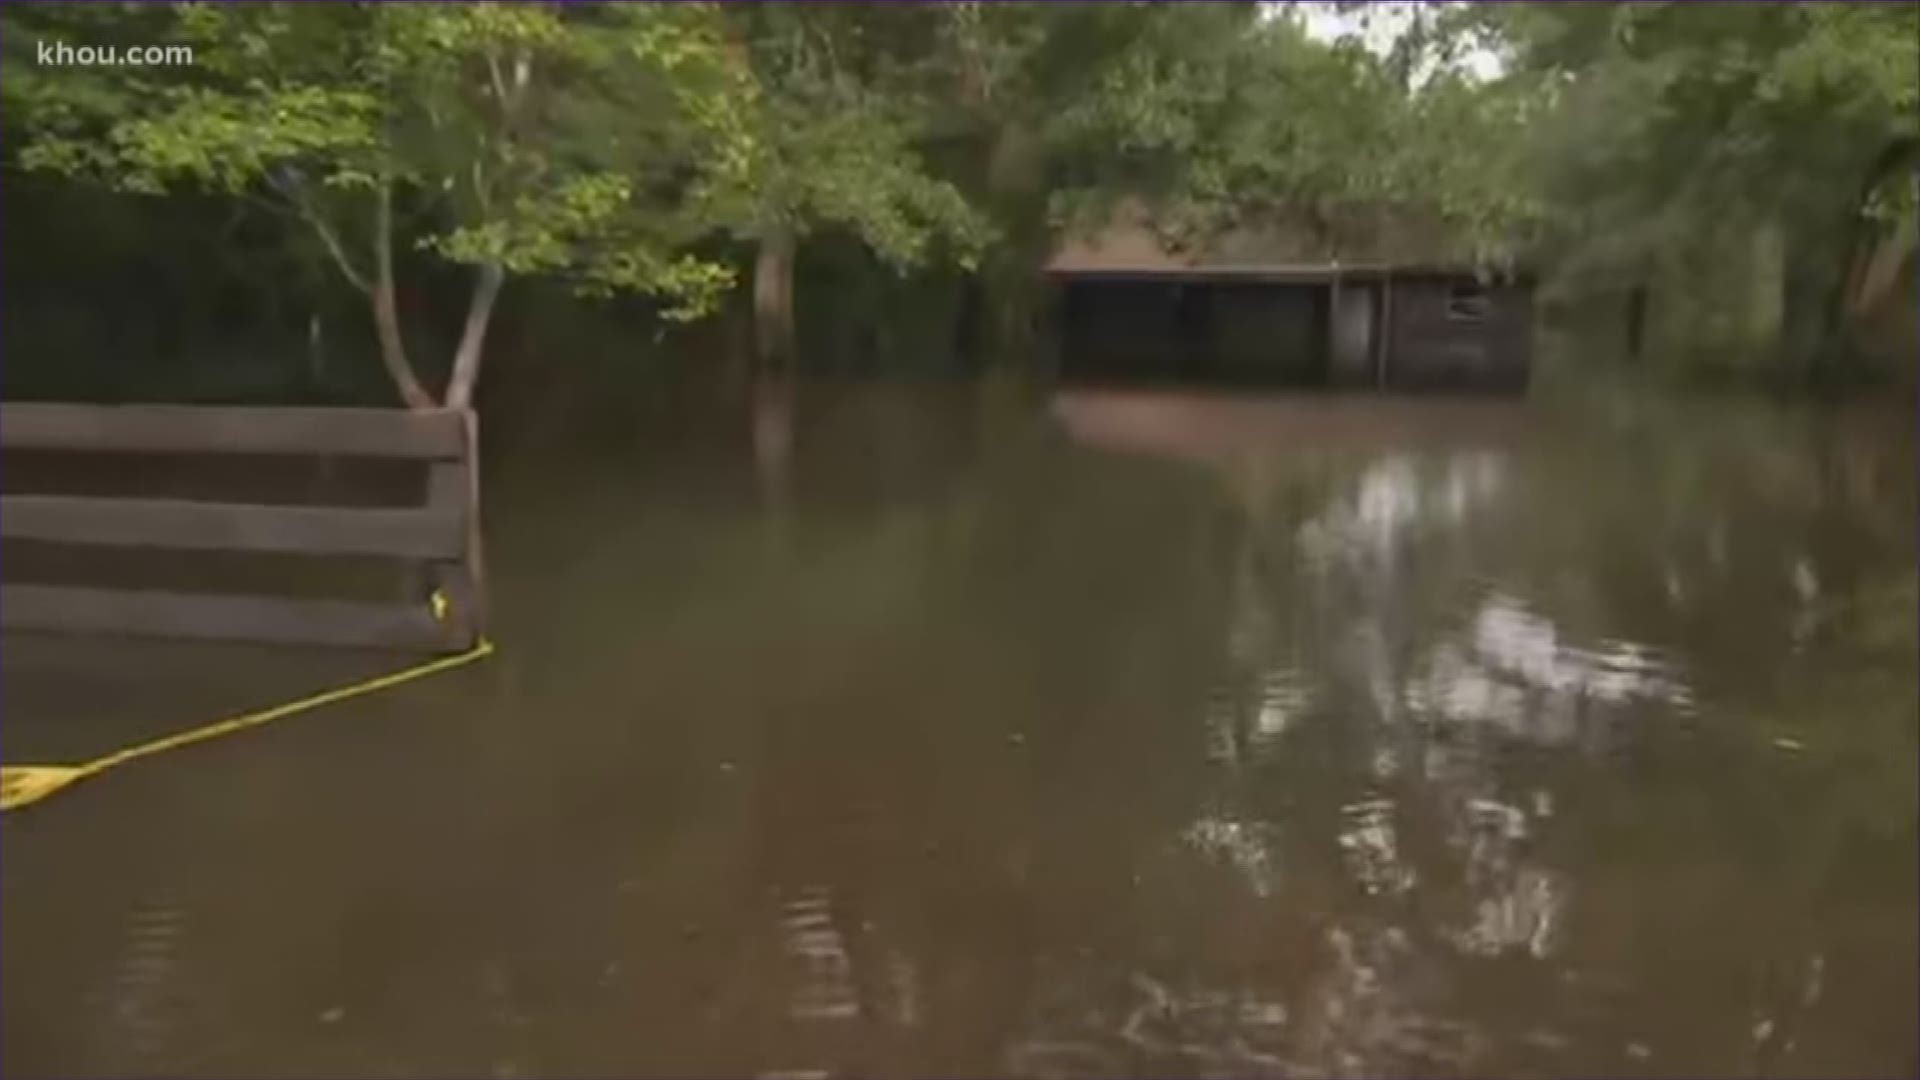 Some residents had recently moved back in after Hurricane Harvey, only to get flooded again.